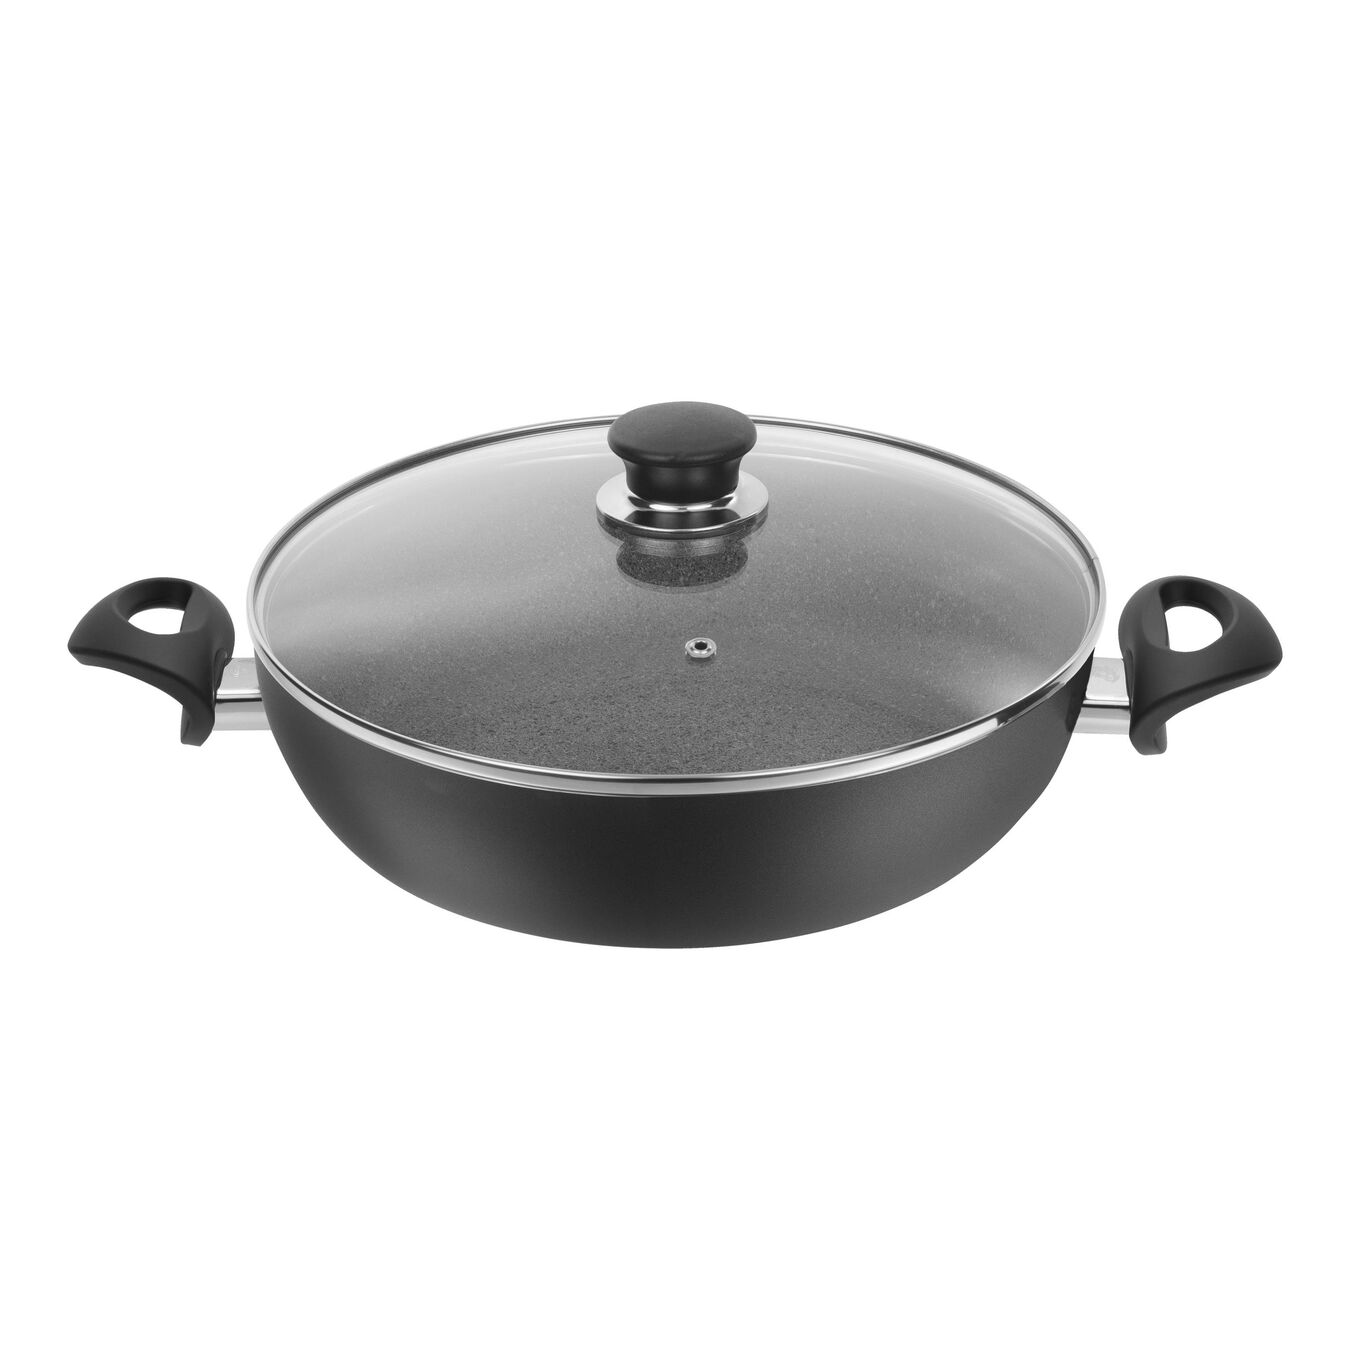 3.6 l Granitium round Saucier and sauteuse with lid, grey,,large 1